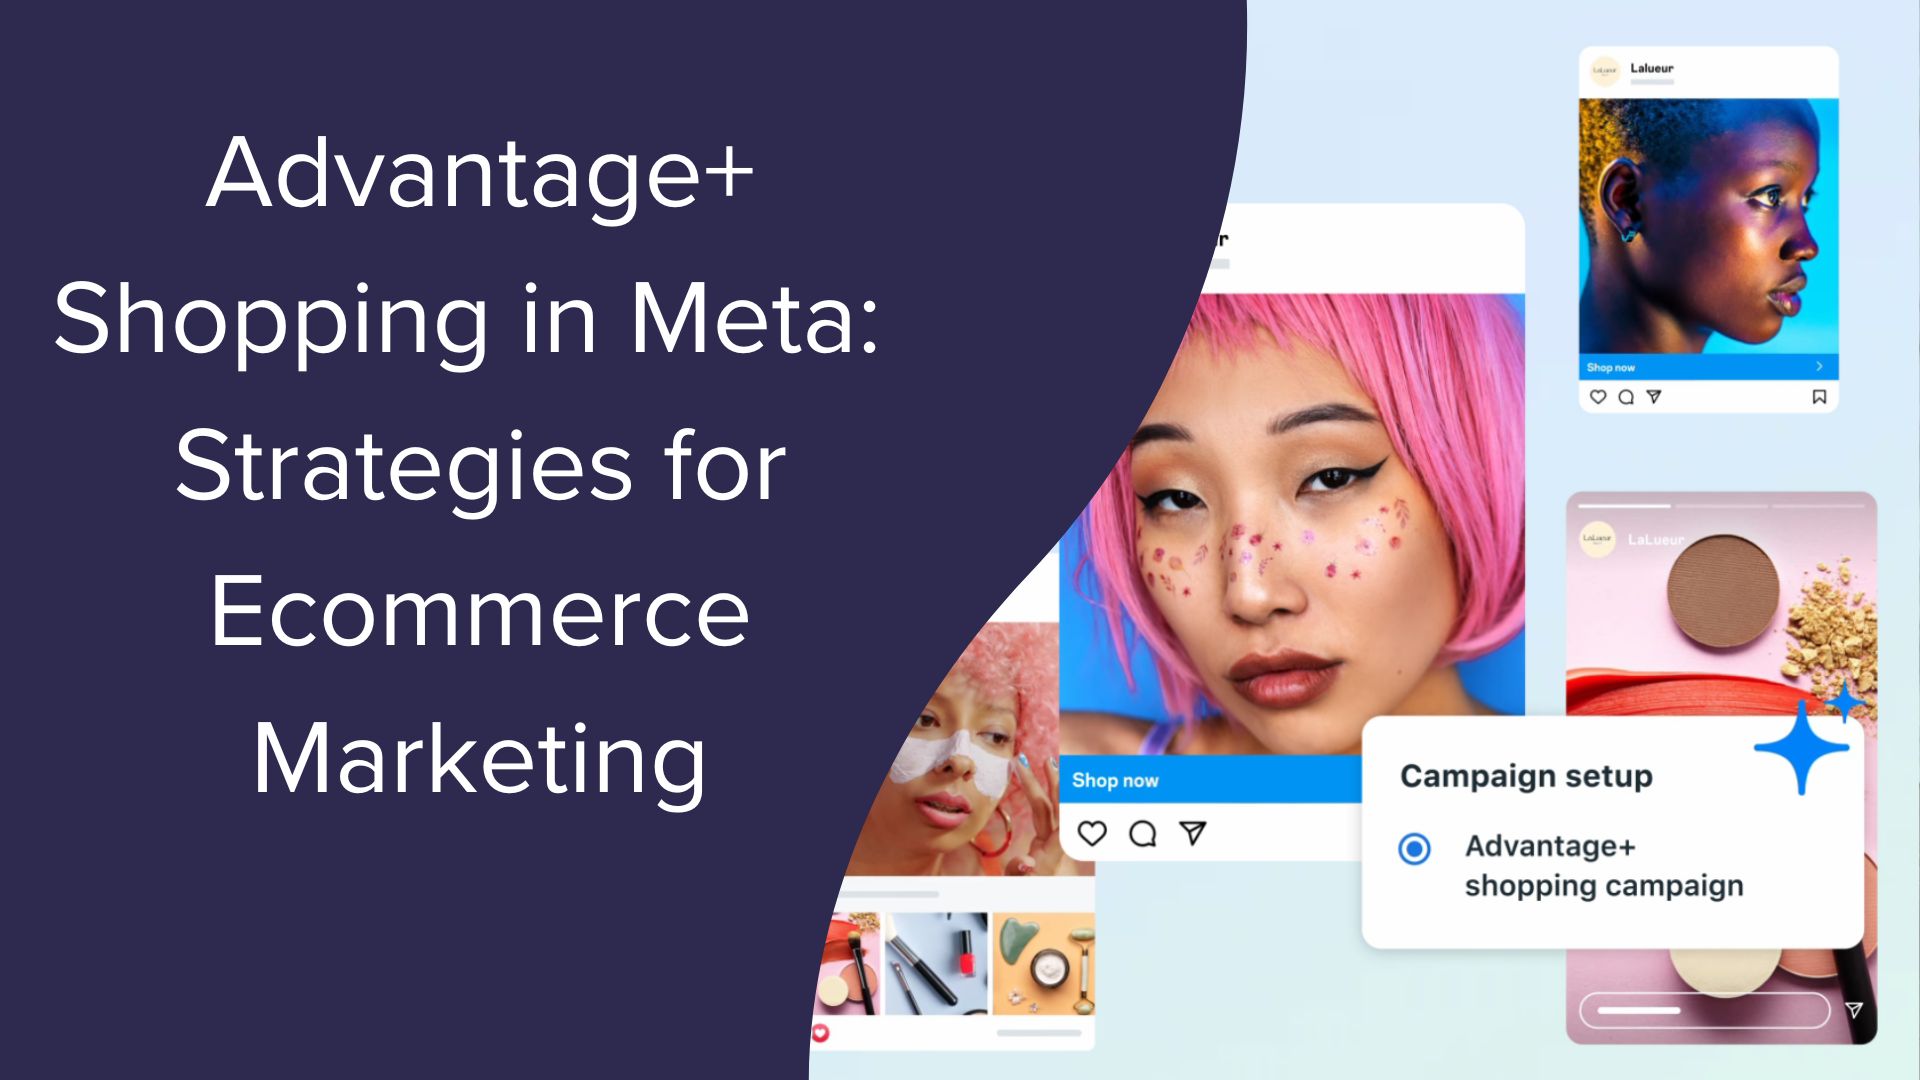 Advantage+ Shopping in Meta: Strategies for Ecommerce Marketing